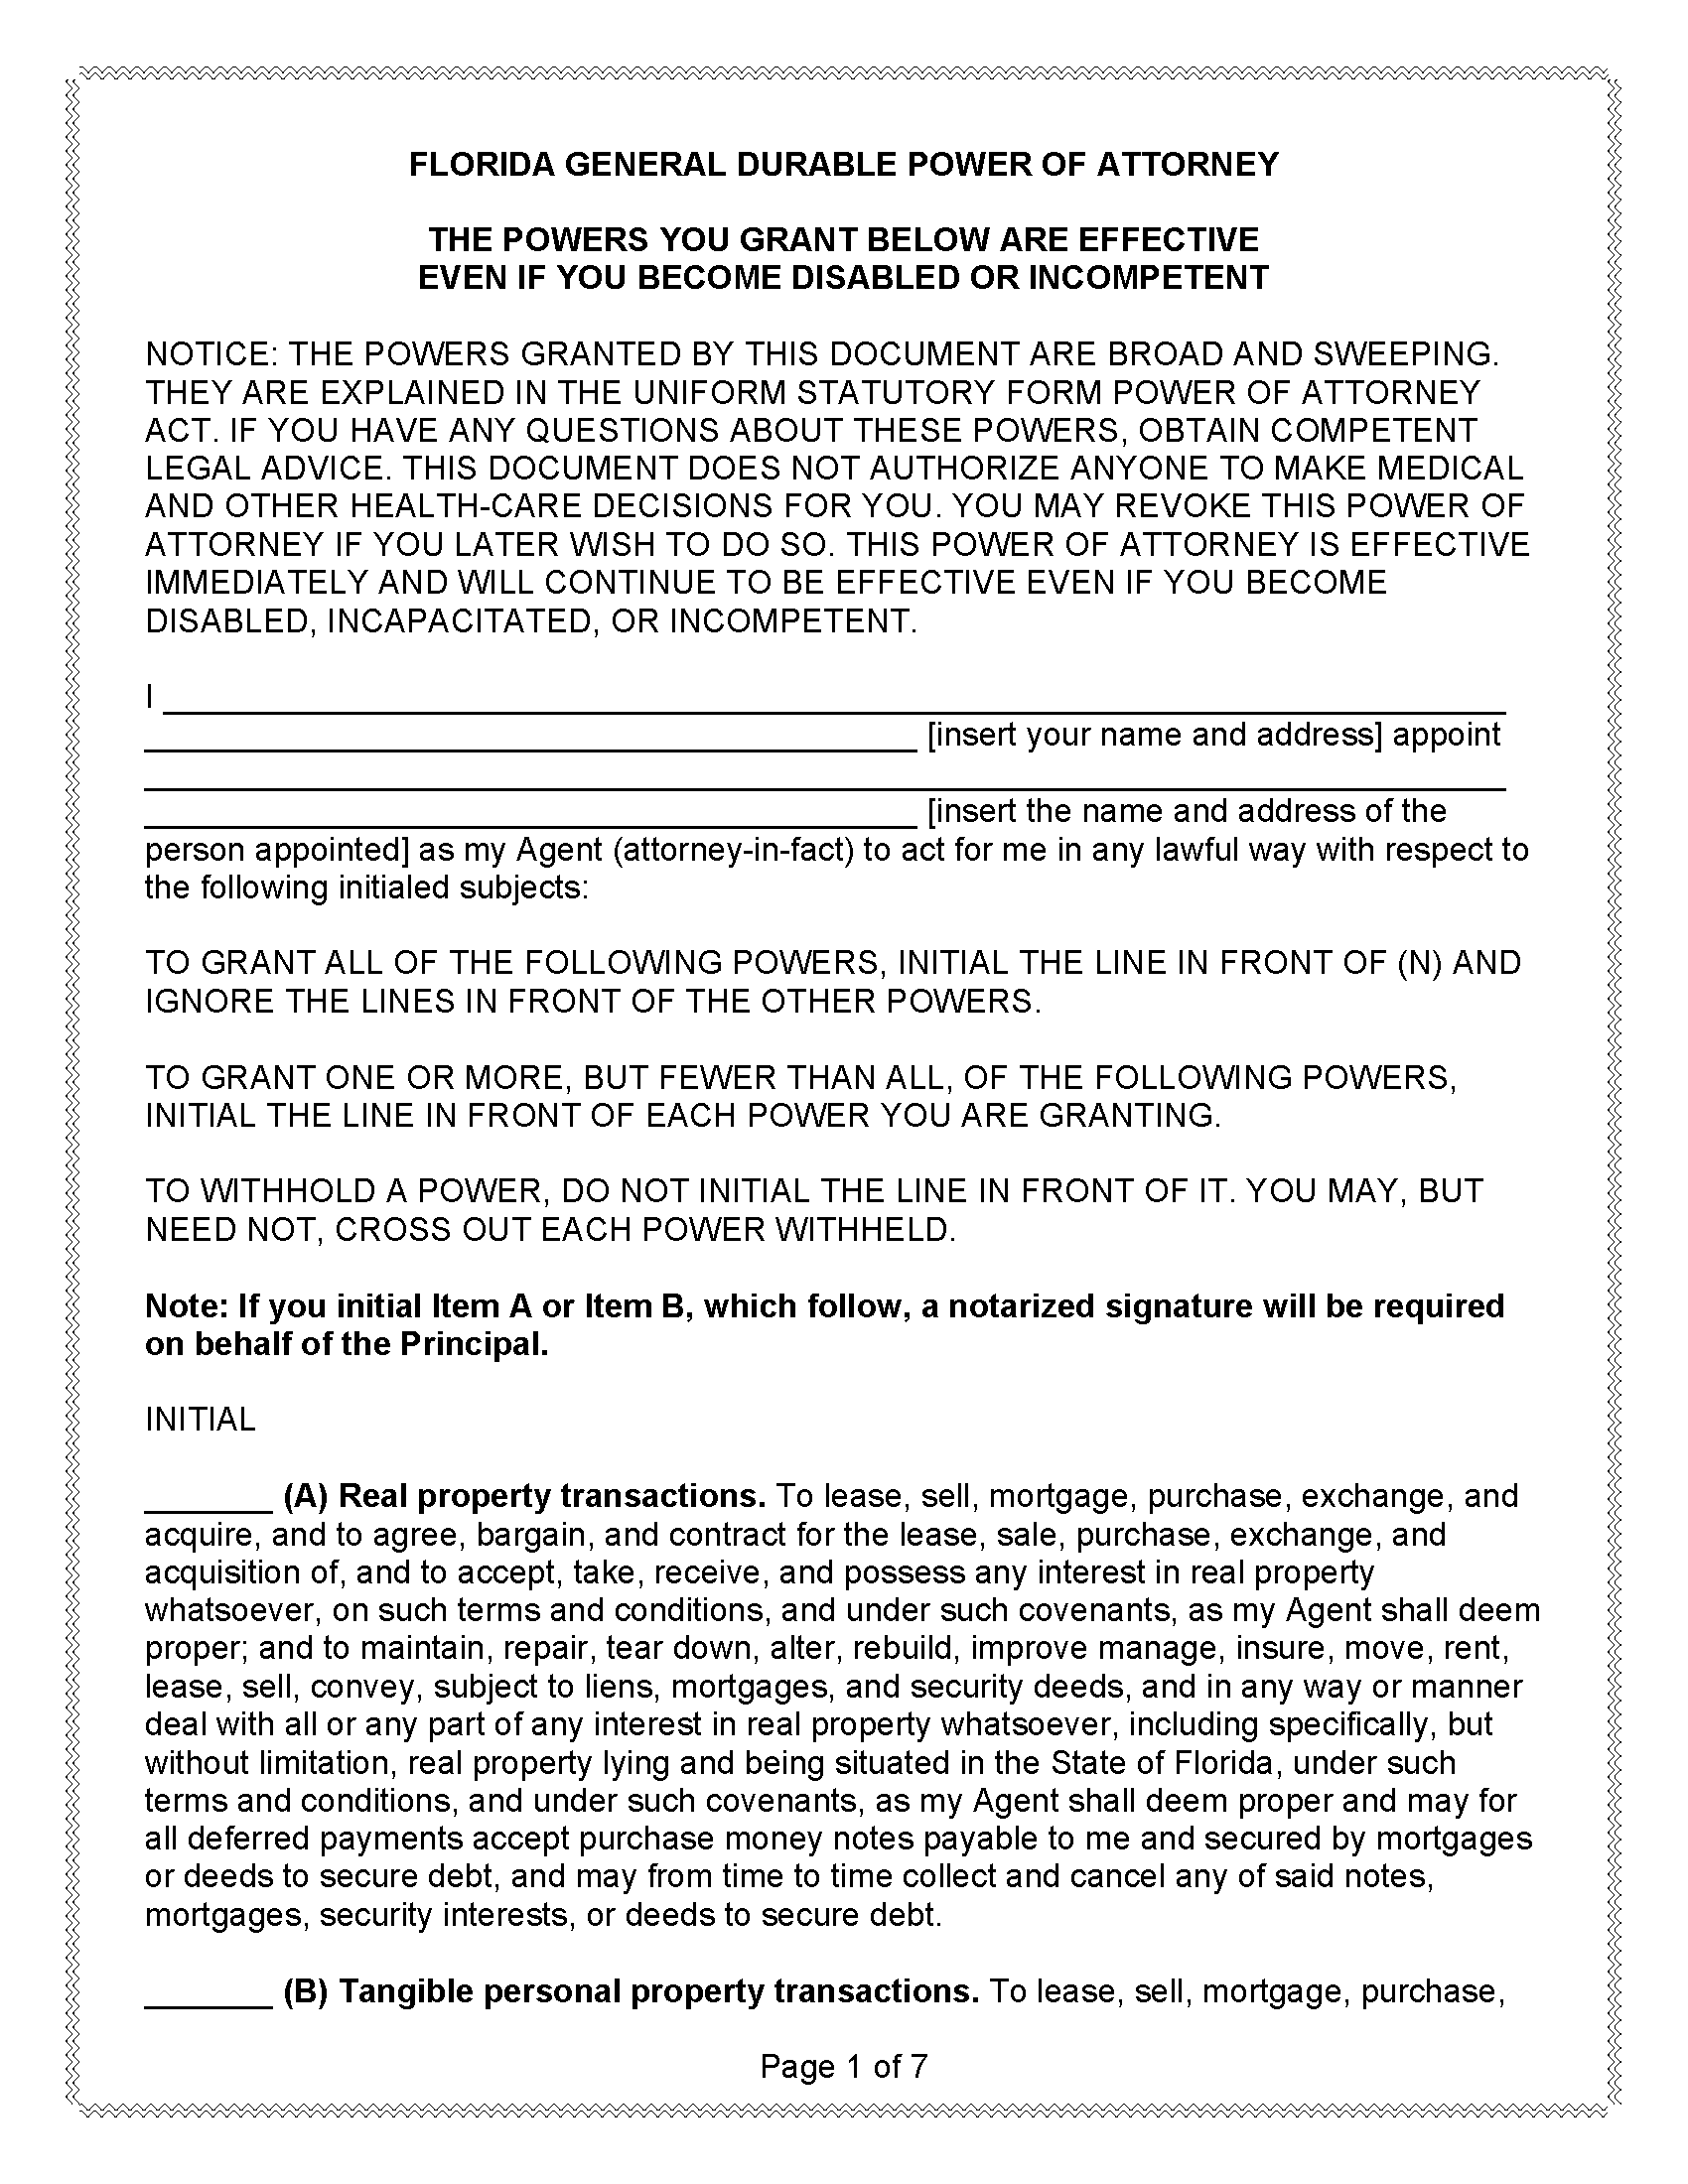 Florida Durable Power of Attorney Form Free Printable Legal Forms